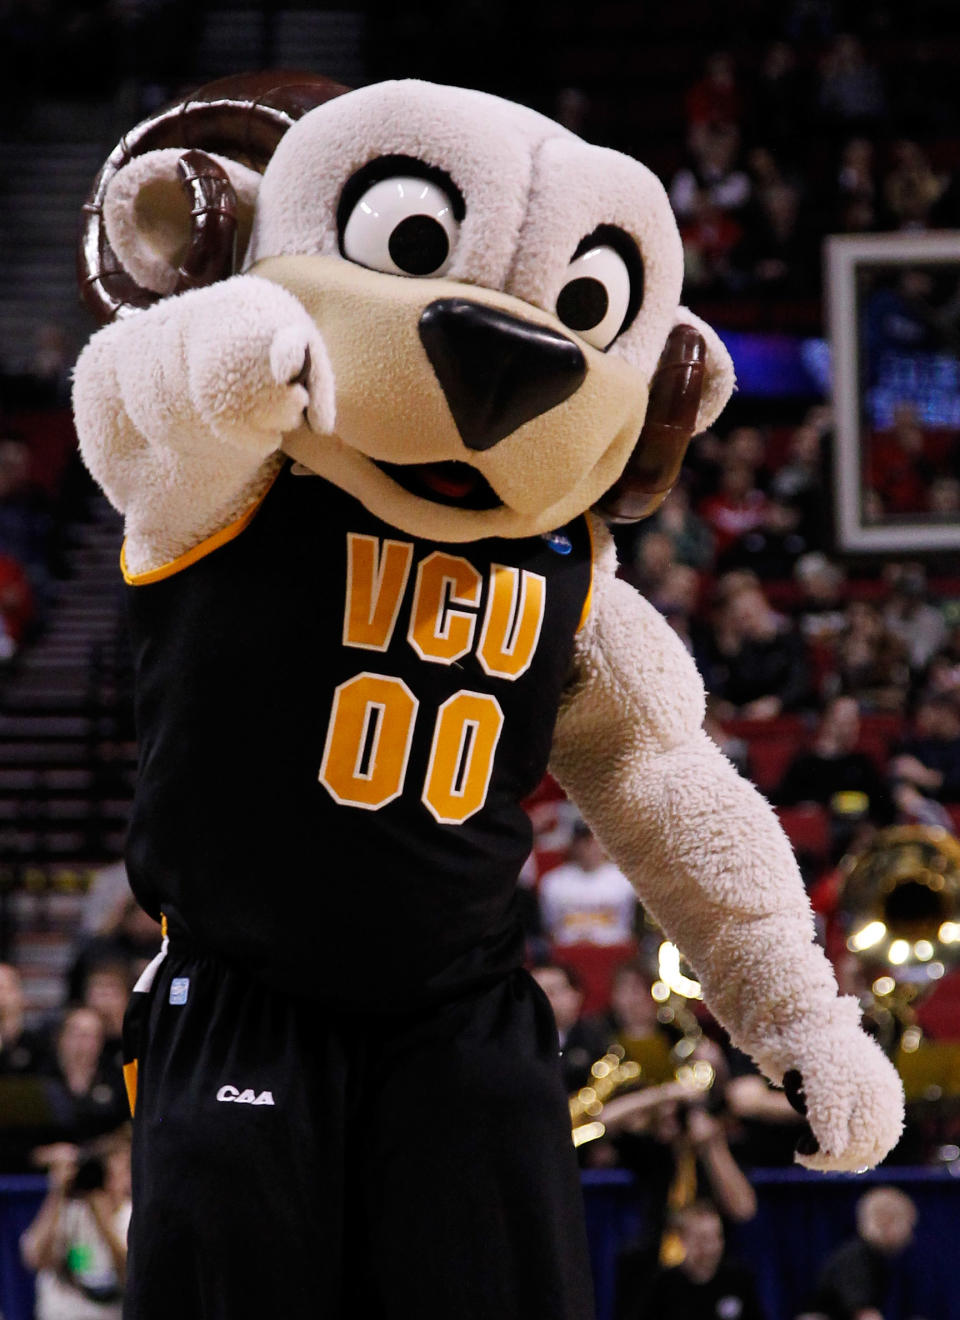 The Virginia Commonwealth Rams mascot performs on the court during a break in the game against the Wichita State Shockers in the second round of the 2012 NCAA men's basketball tournament at Rose Garden Arena on March 15, 2012 in Portland, Oregon. (Photo by Jonathan Ferrey/Getty Images)